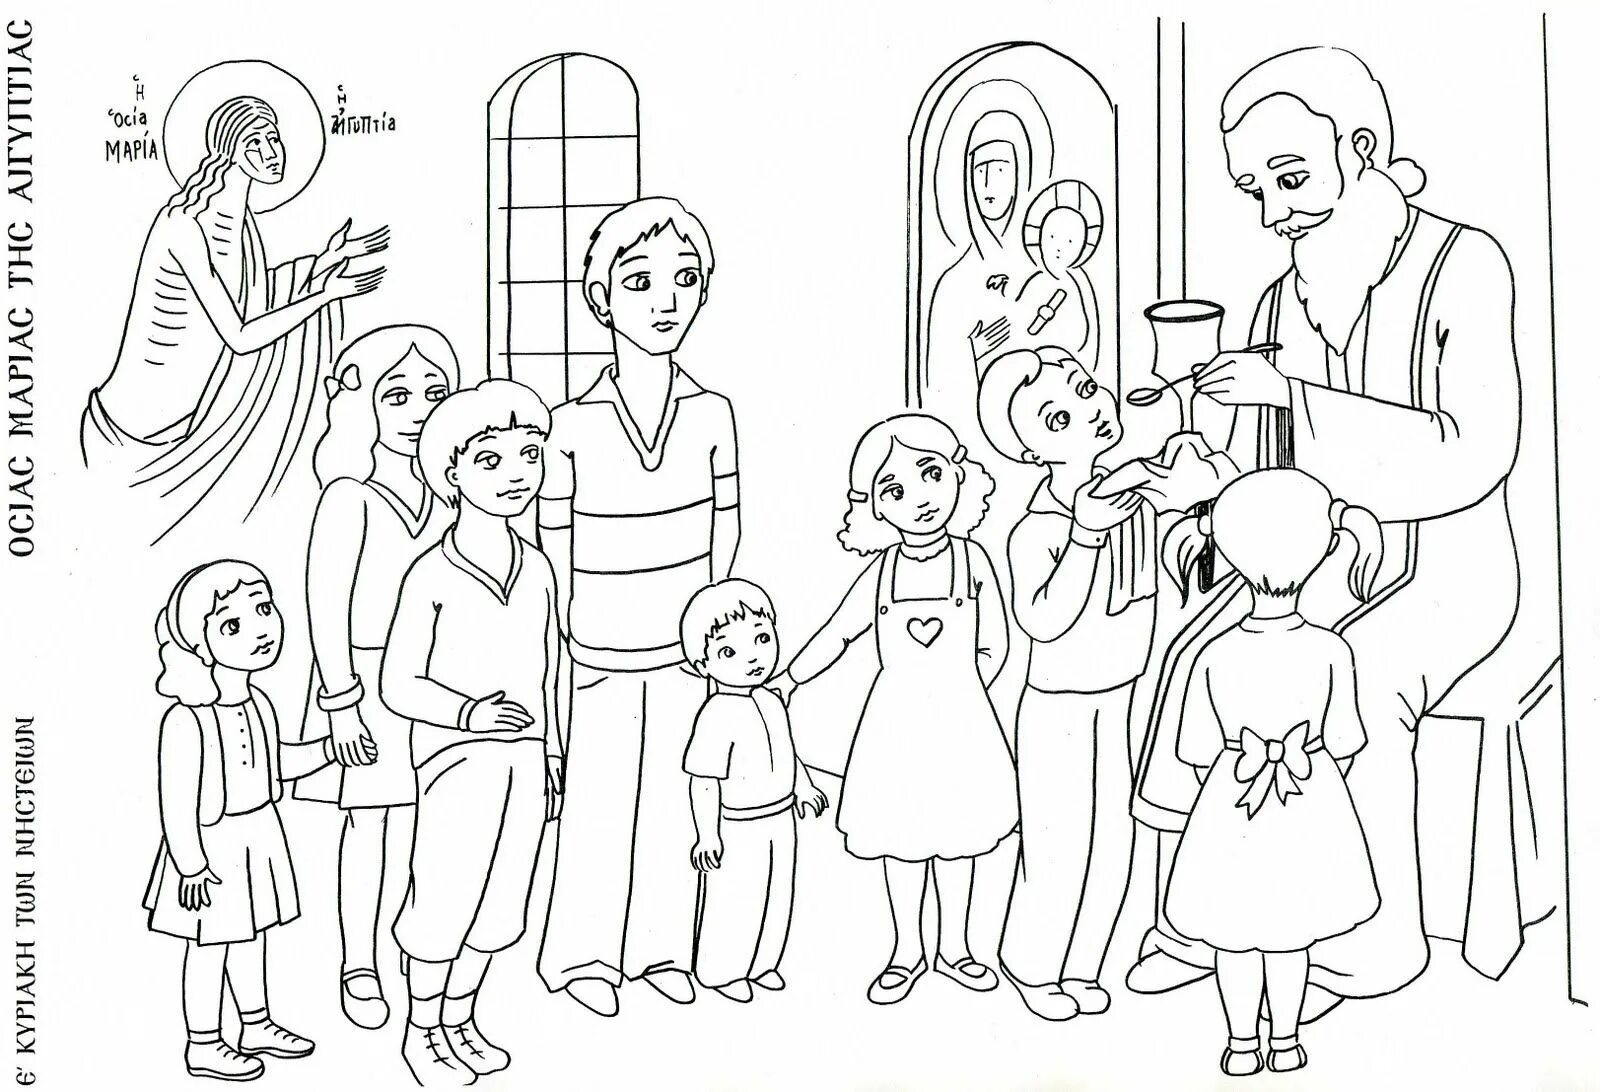 Sunday School Explosion coloring page